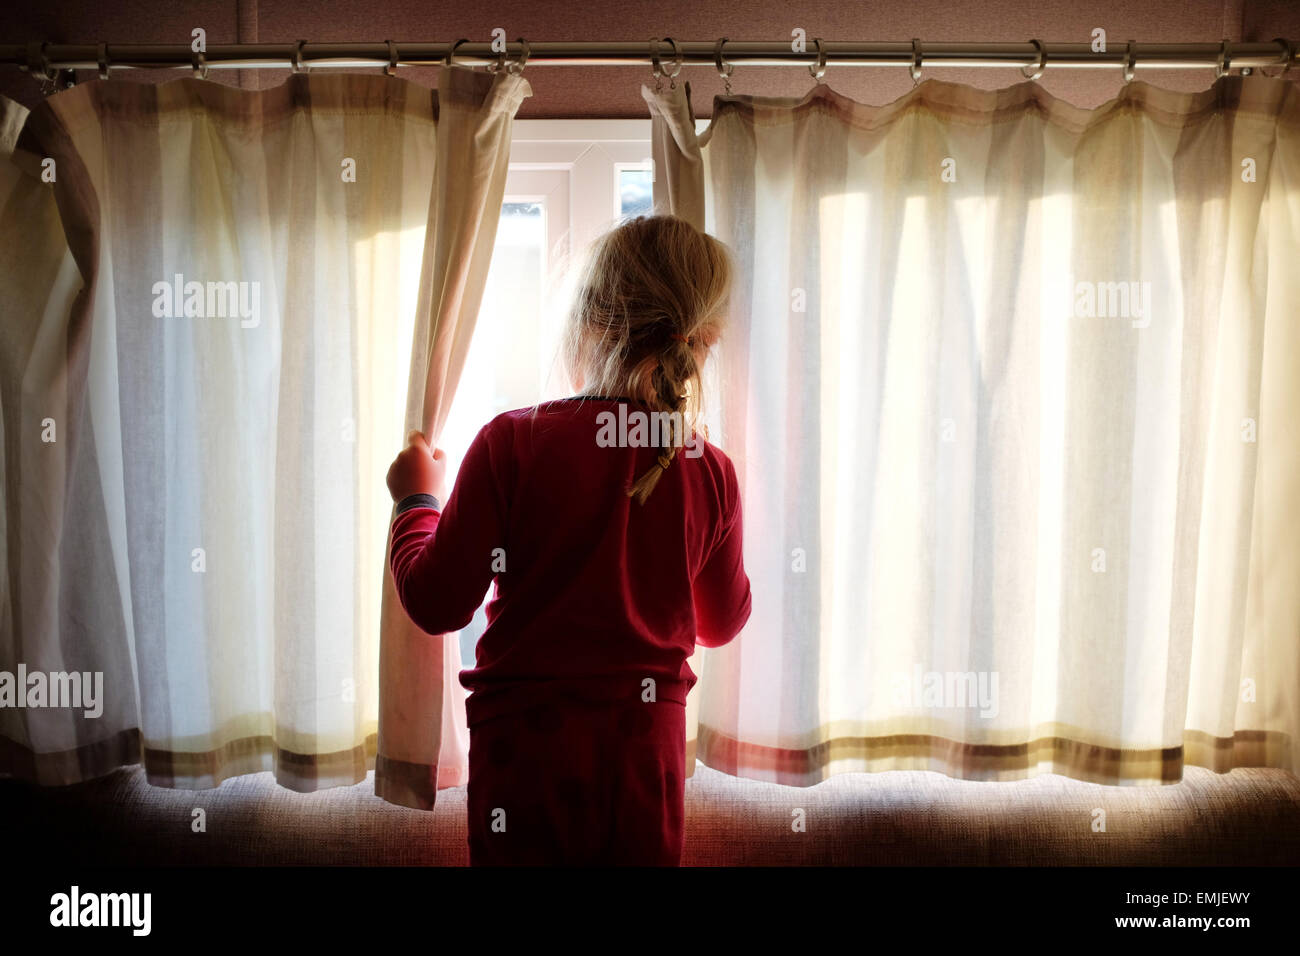 A sleepy young girl in pyjamas opens the curtains to look out of the window at the start of a new day Stock Photo